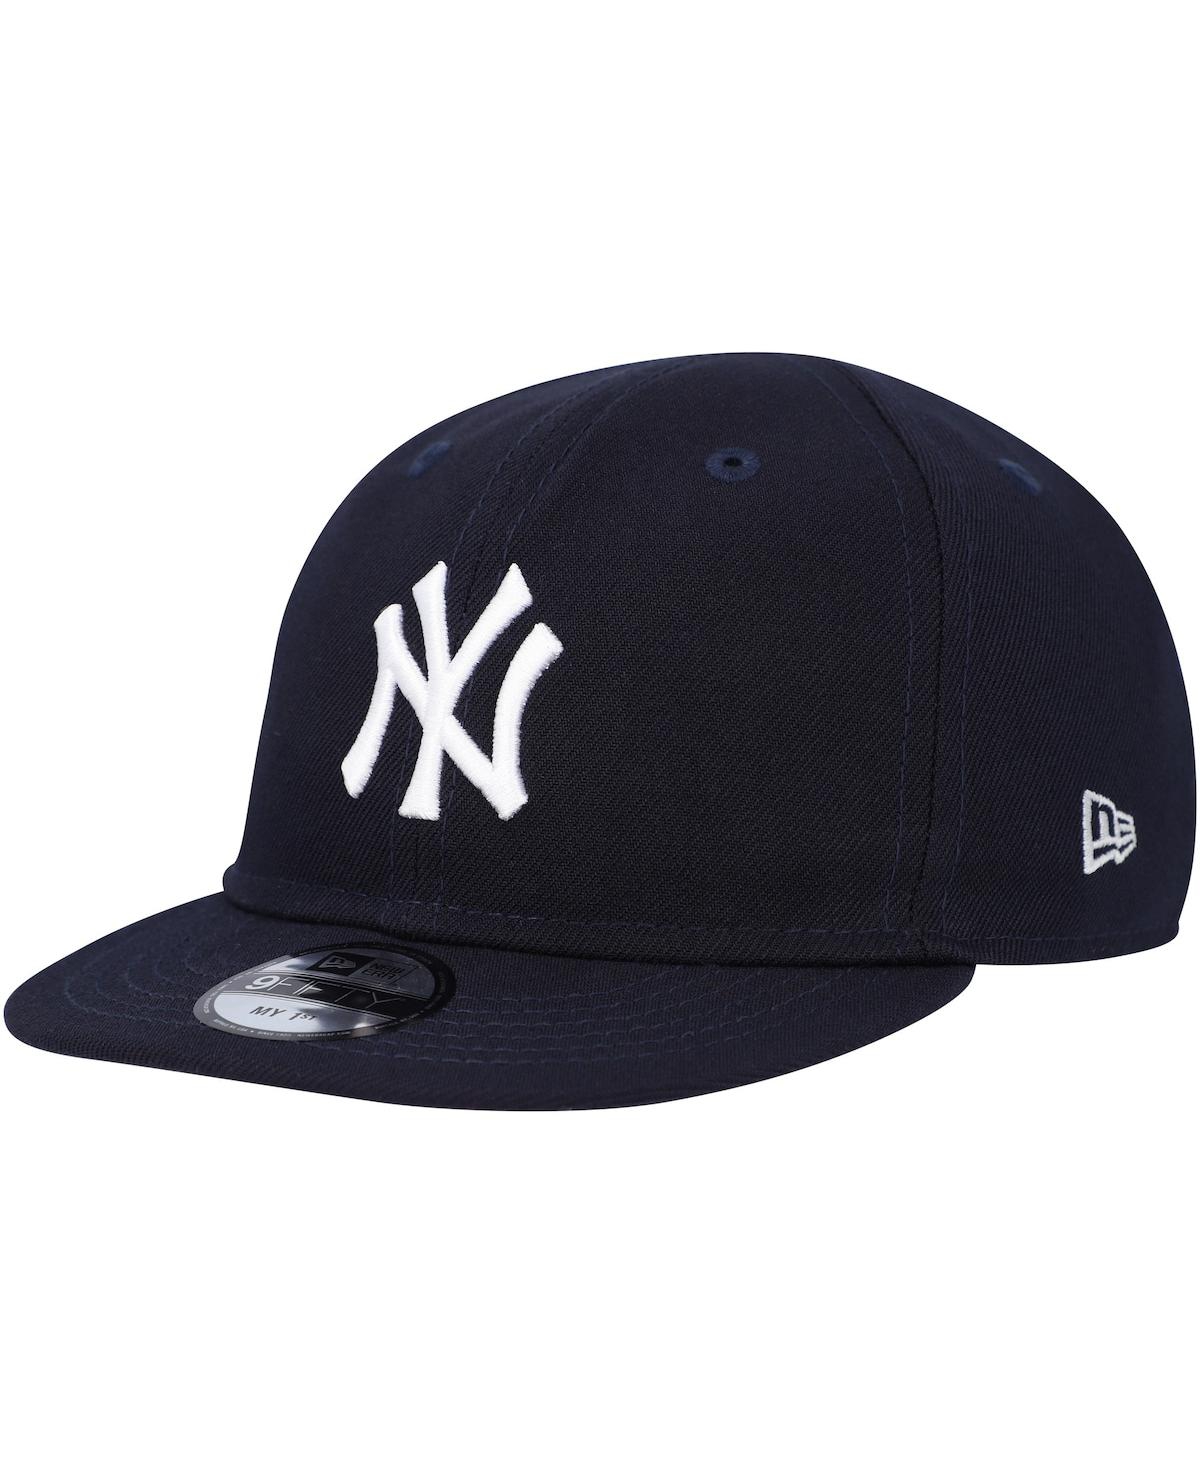 New Era Babies' Infant Boys And Girls  Navy New York Yankees My First 9fifty Adjustable Hat